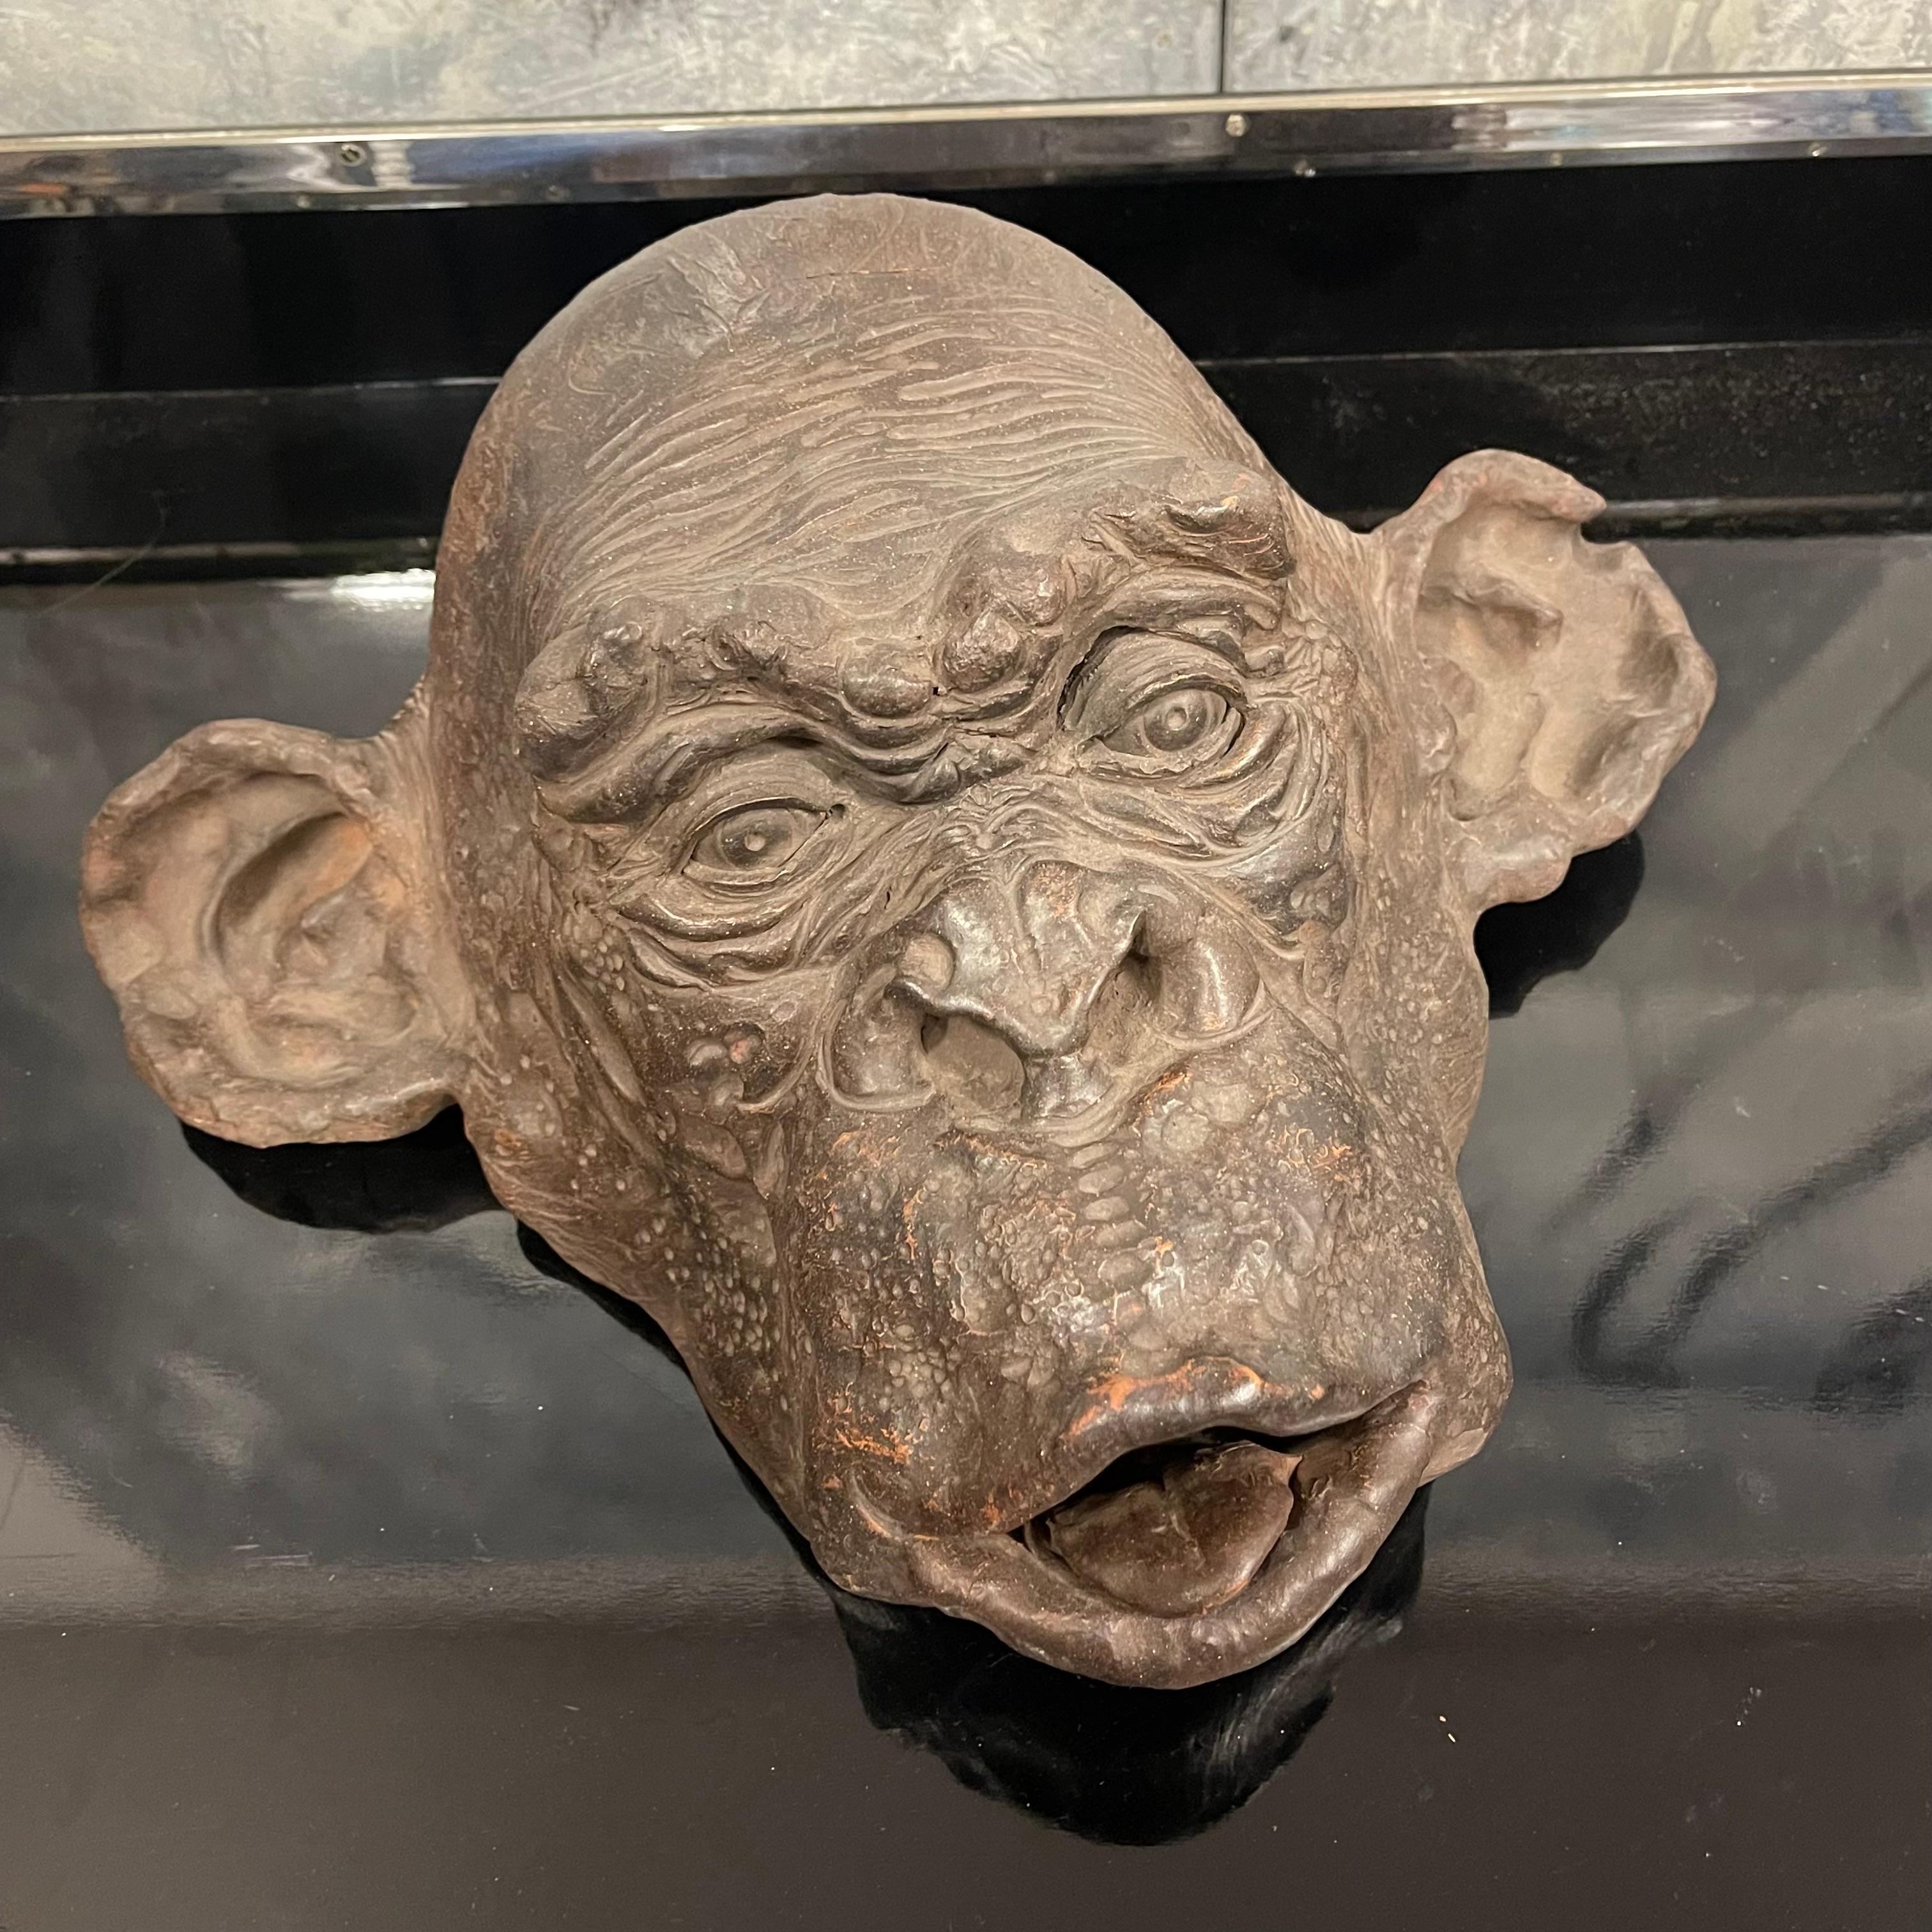 Modern Bonobo Monkey Head Sculpture in Terracotta Signed and Dated - Italy 2019 For Sale